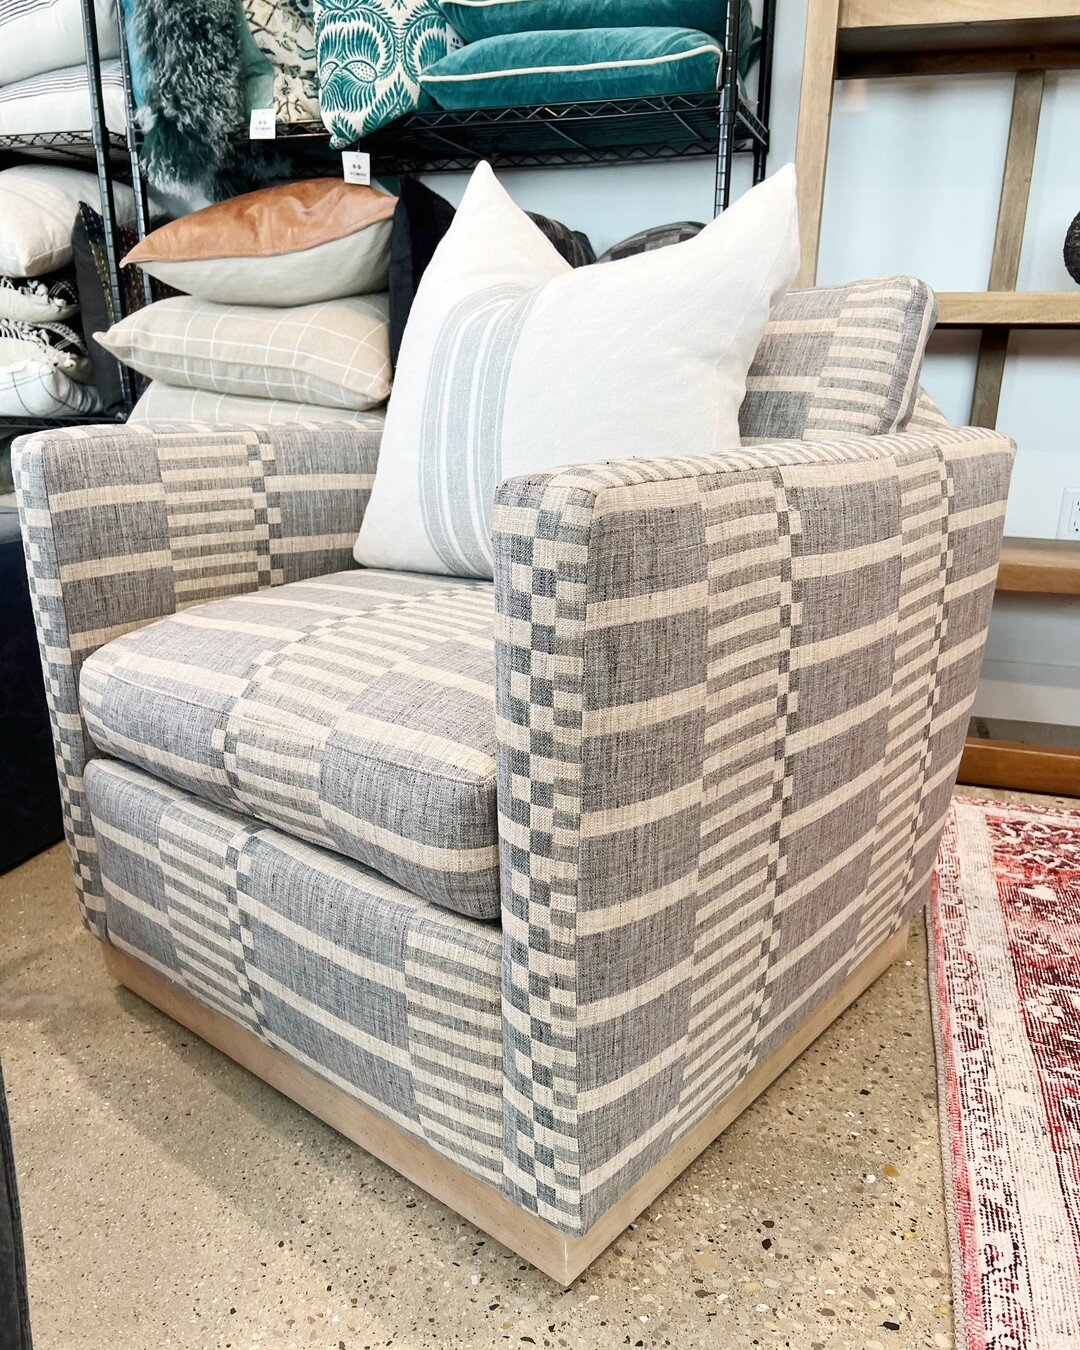 This swivel always has our attention! Last chance to save 20% off furniture and 15% off storewide!

#interiordecorating #furniturestore #ghomestore #hometrends #style #shoplocal #elmgrove #interiorhomes #swivelchair #pillows #customupholstery #design